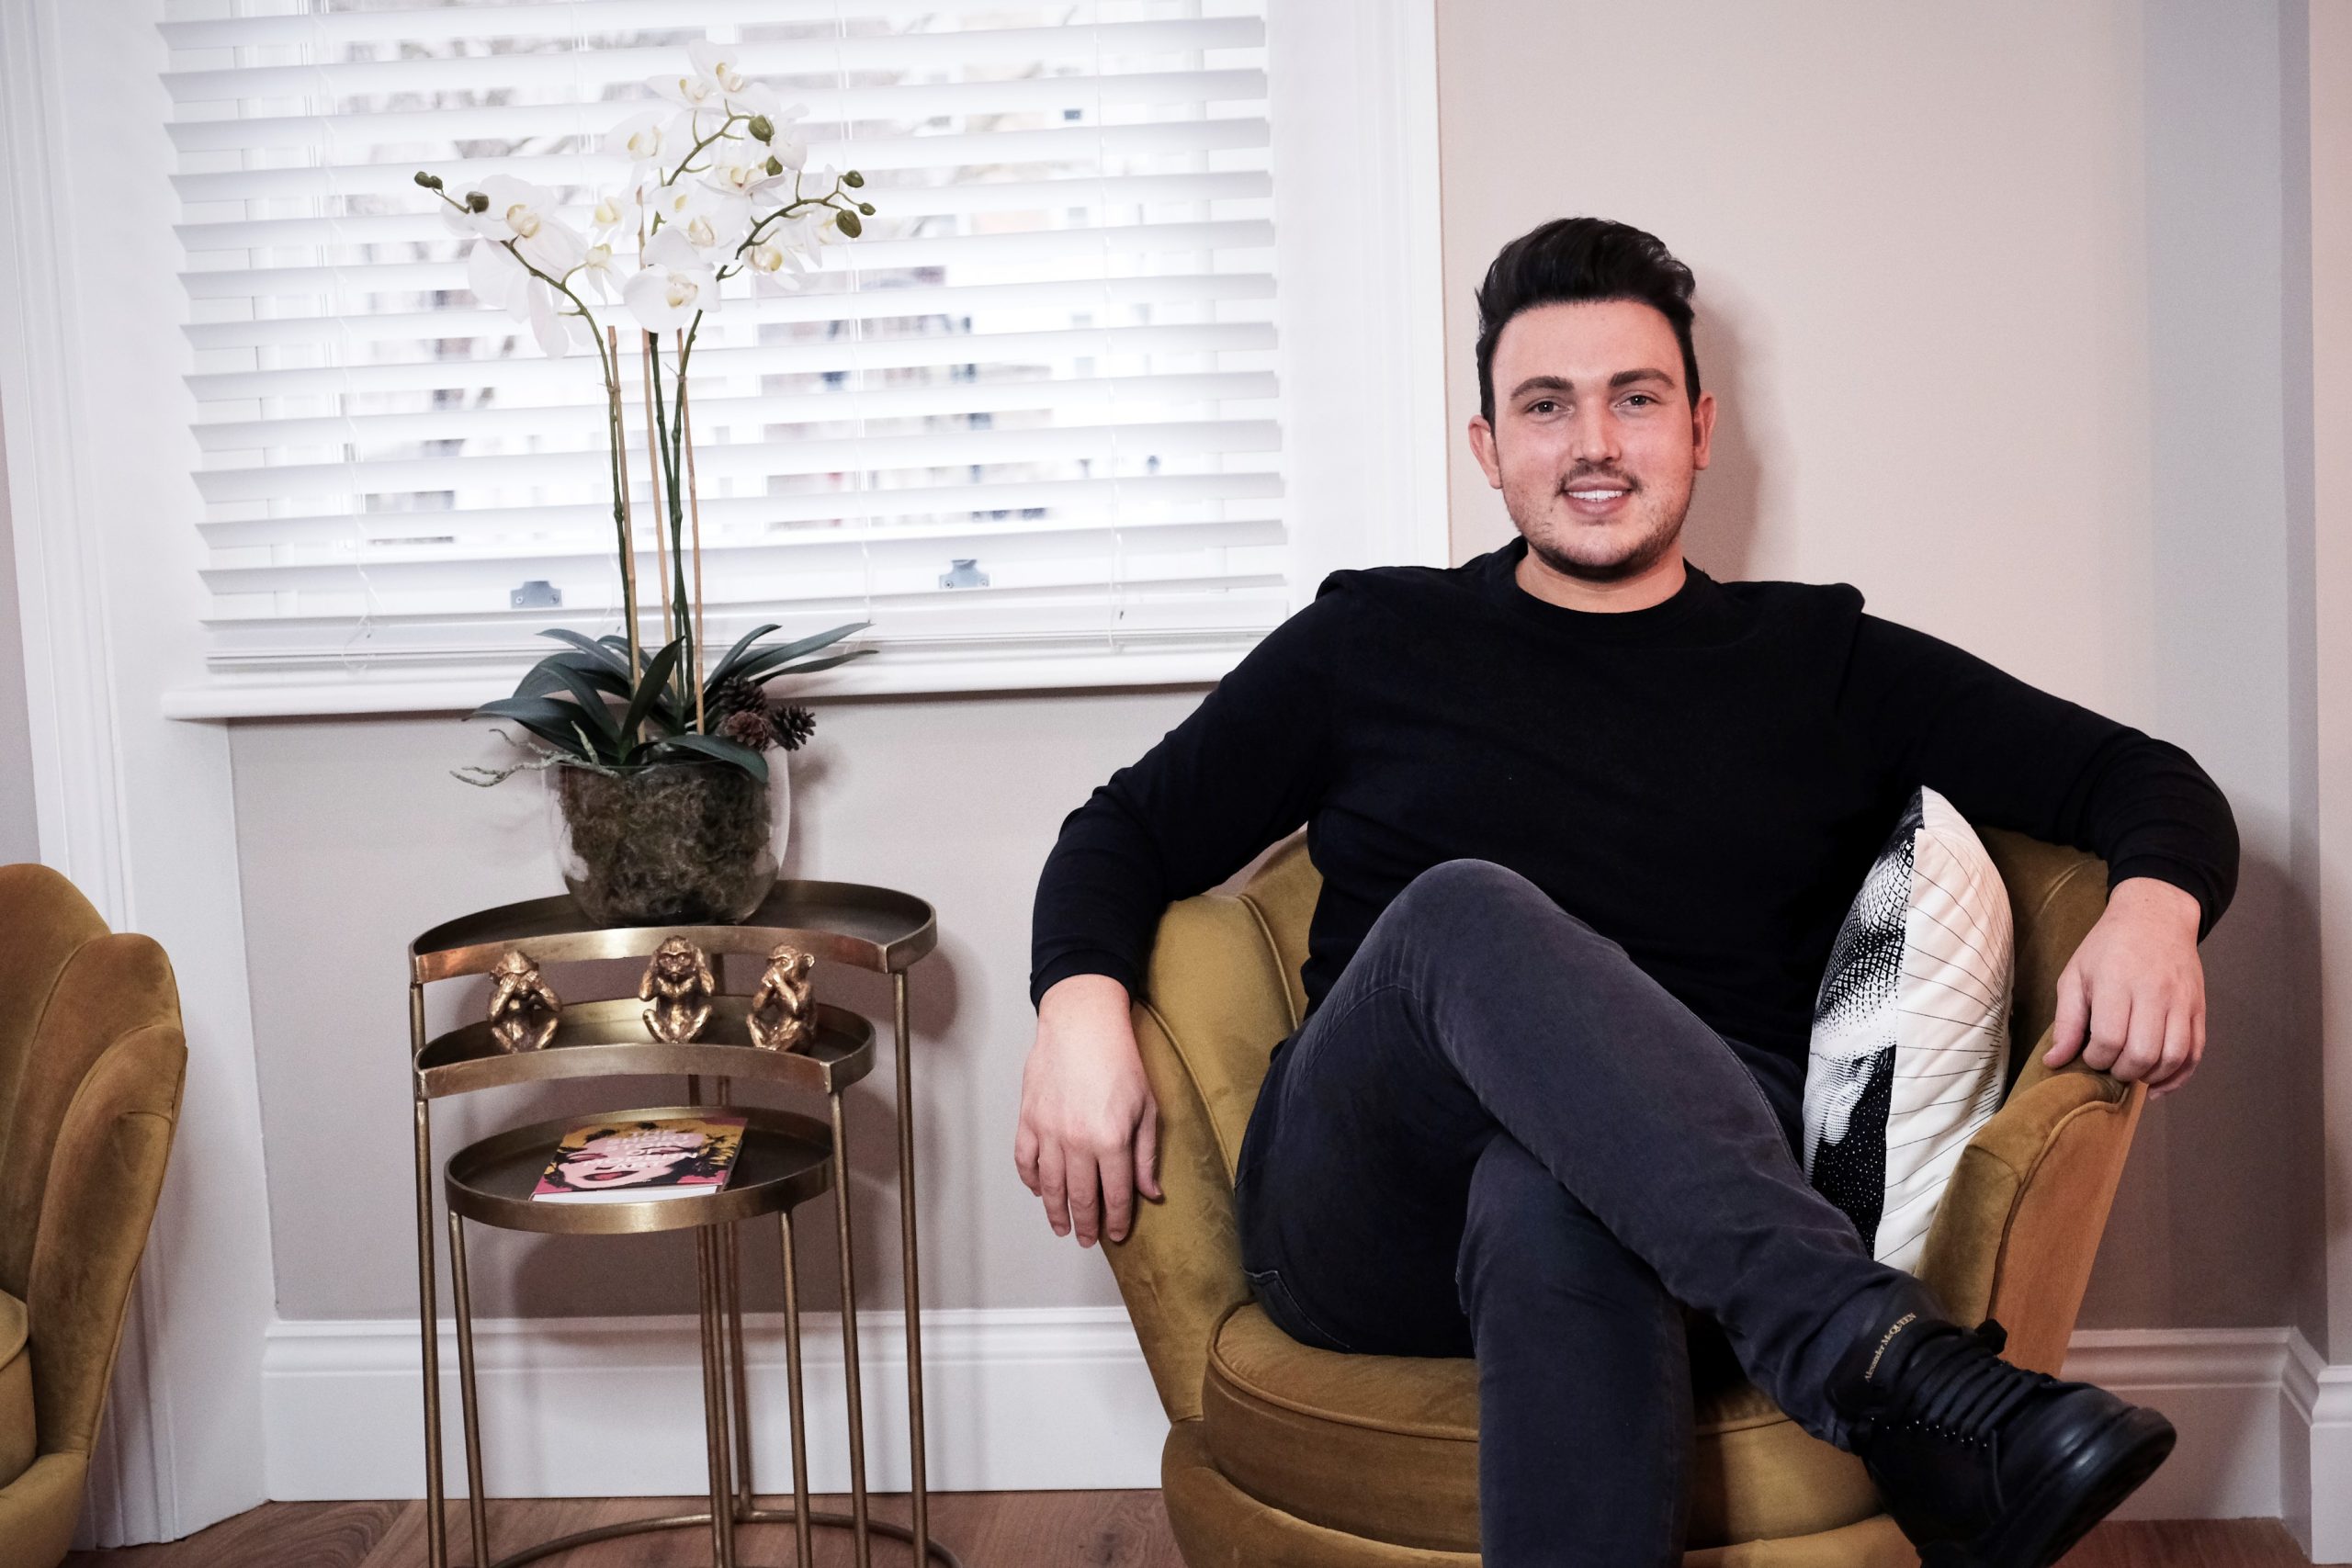 Skincare expert Shane Cooper sits with his legs crossed in an armchair